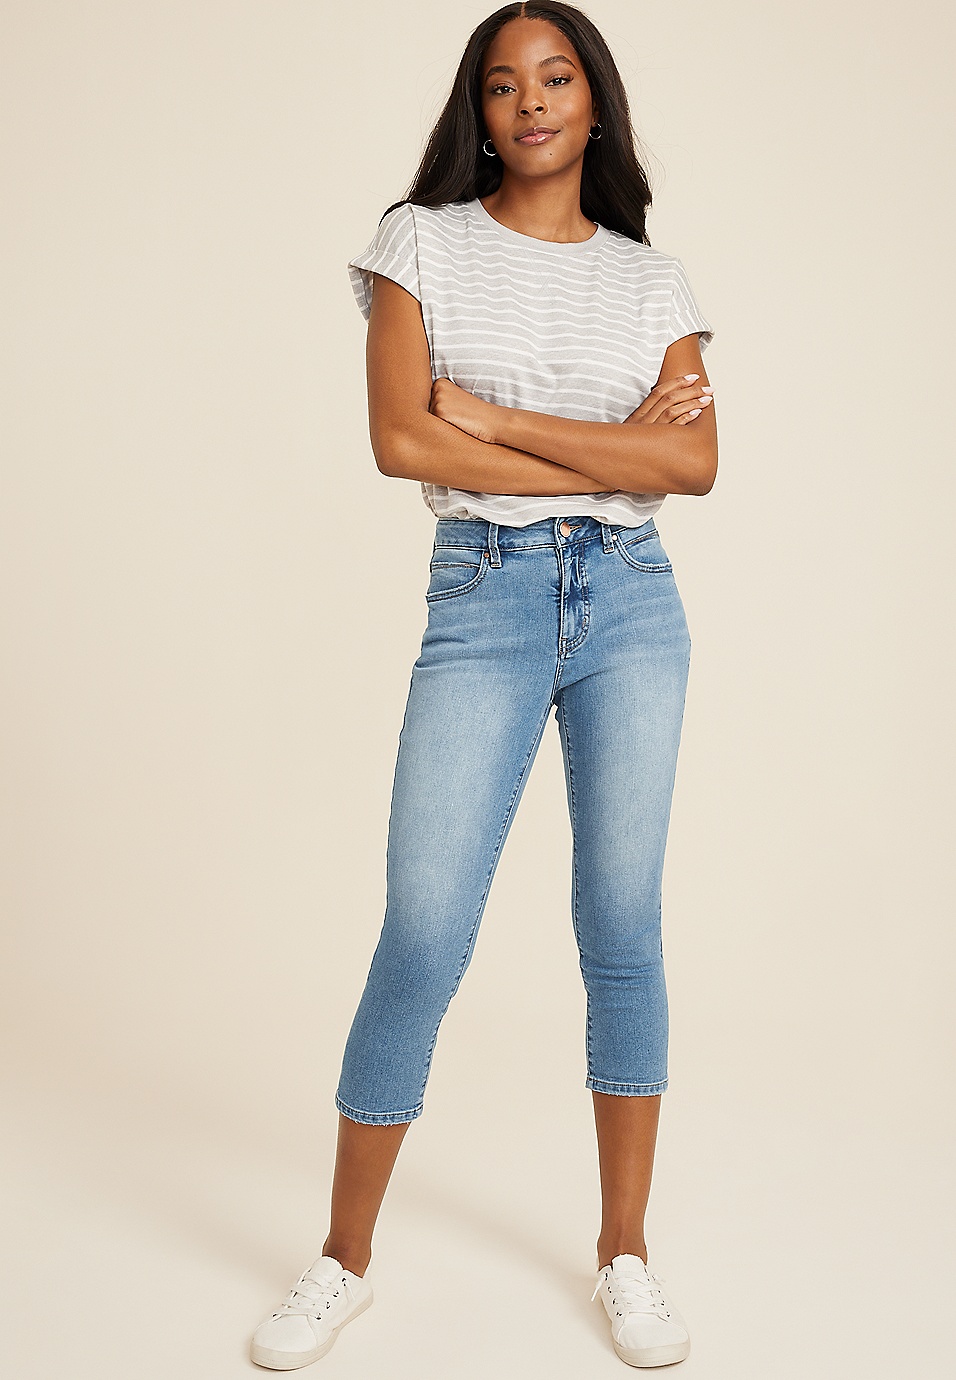 m jeans by maurices™ Everflex™ High Rise Super Skinny Cropped Jean |  maurices